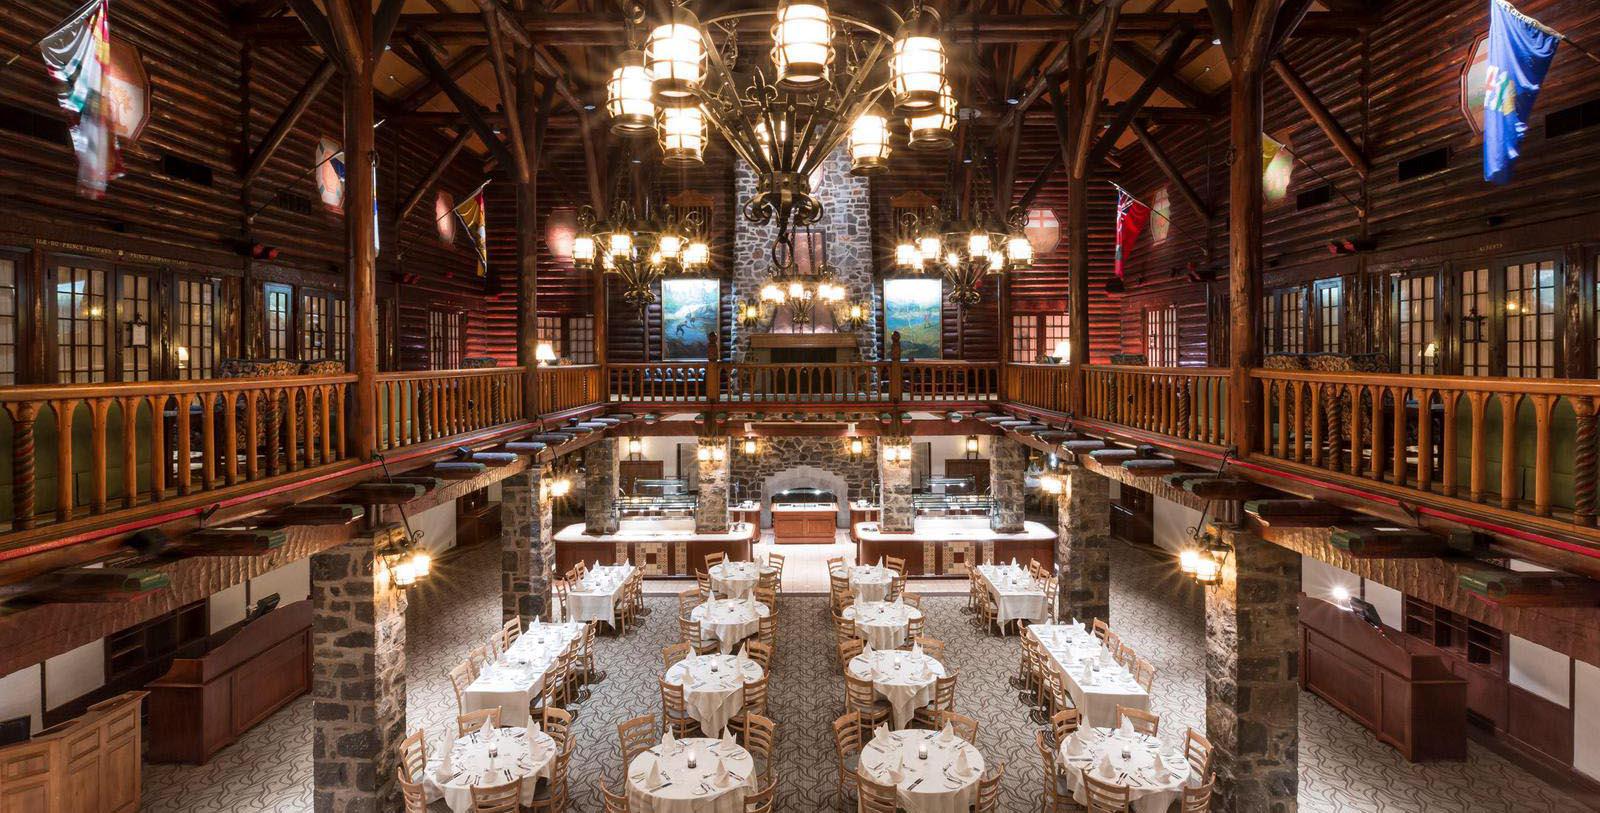 Image of the Dining Room of the Fairmont Le Château Montebello hotel in Montebello, Quebec, Canada